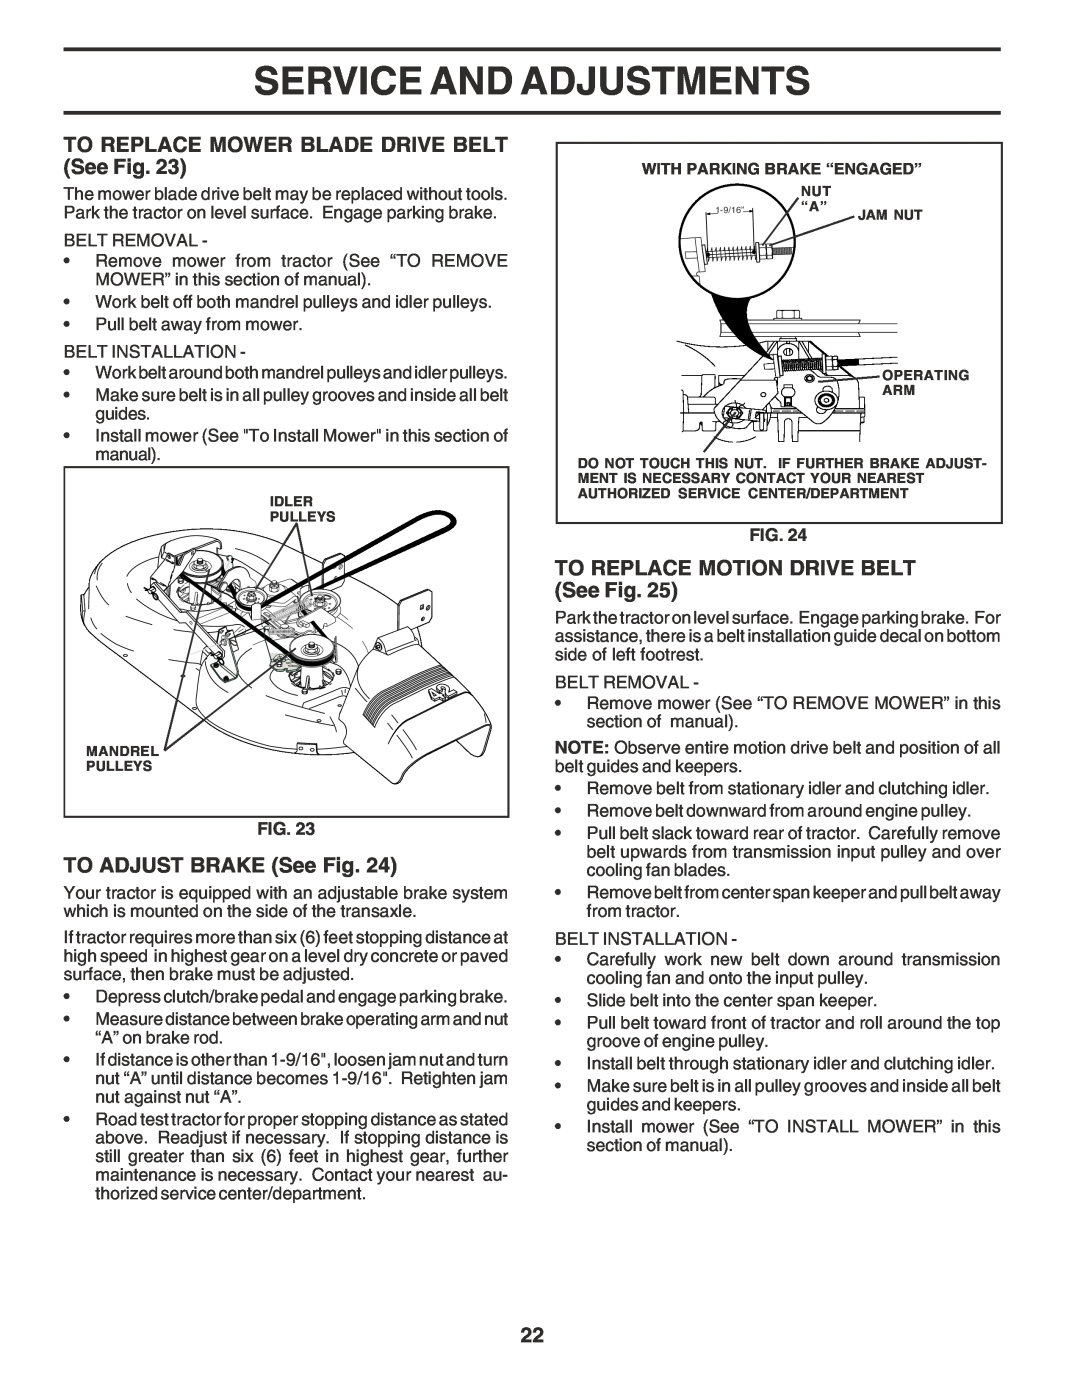 Poulan 182770 TO REPLACE MOWER BLADE DRIVE BELT See Fig, TO ADJUST BRAKE See Fig, TO REPLACE MOTION DRIVE BELT See Fig 